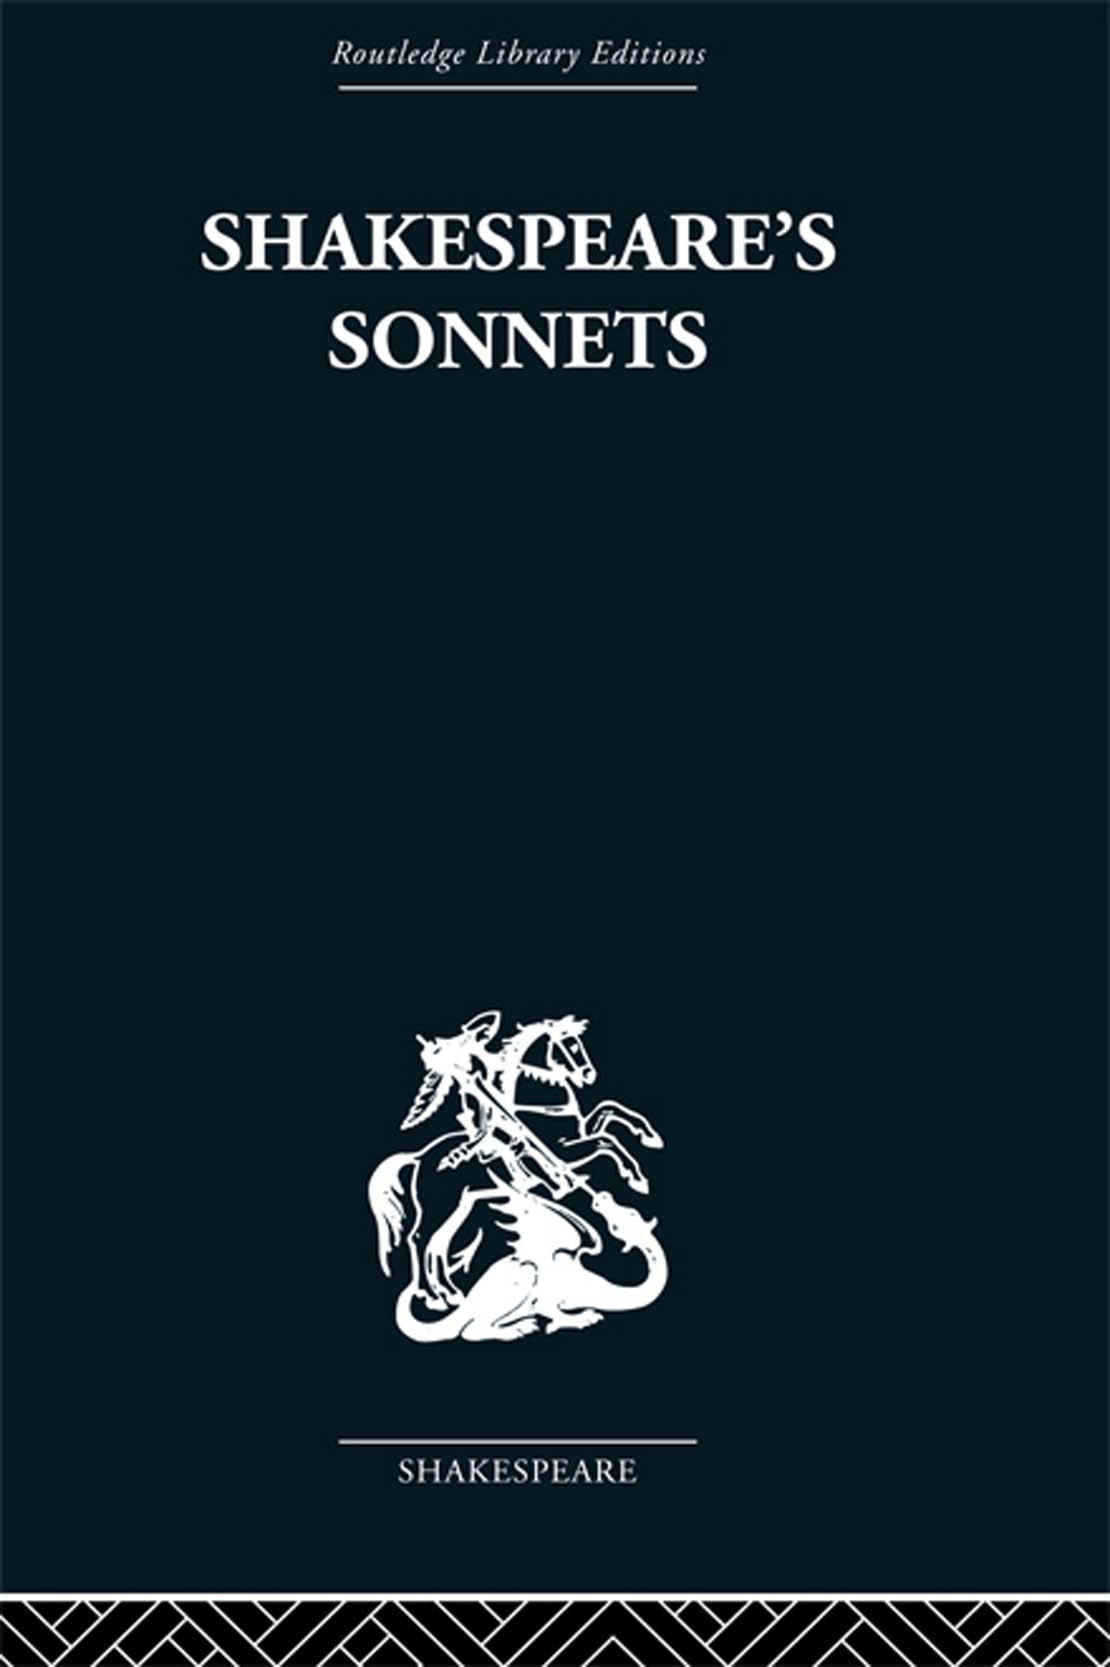 Shakespeares Sonnets - image 1